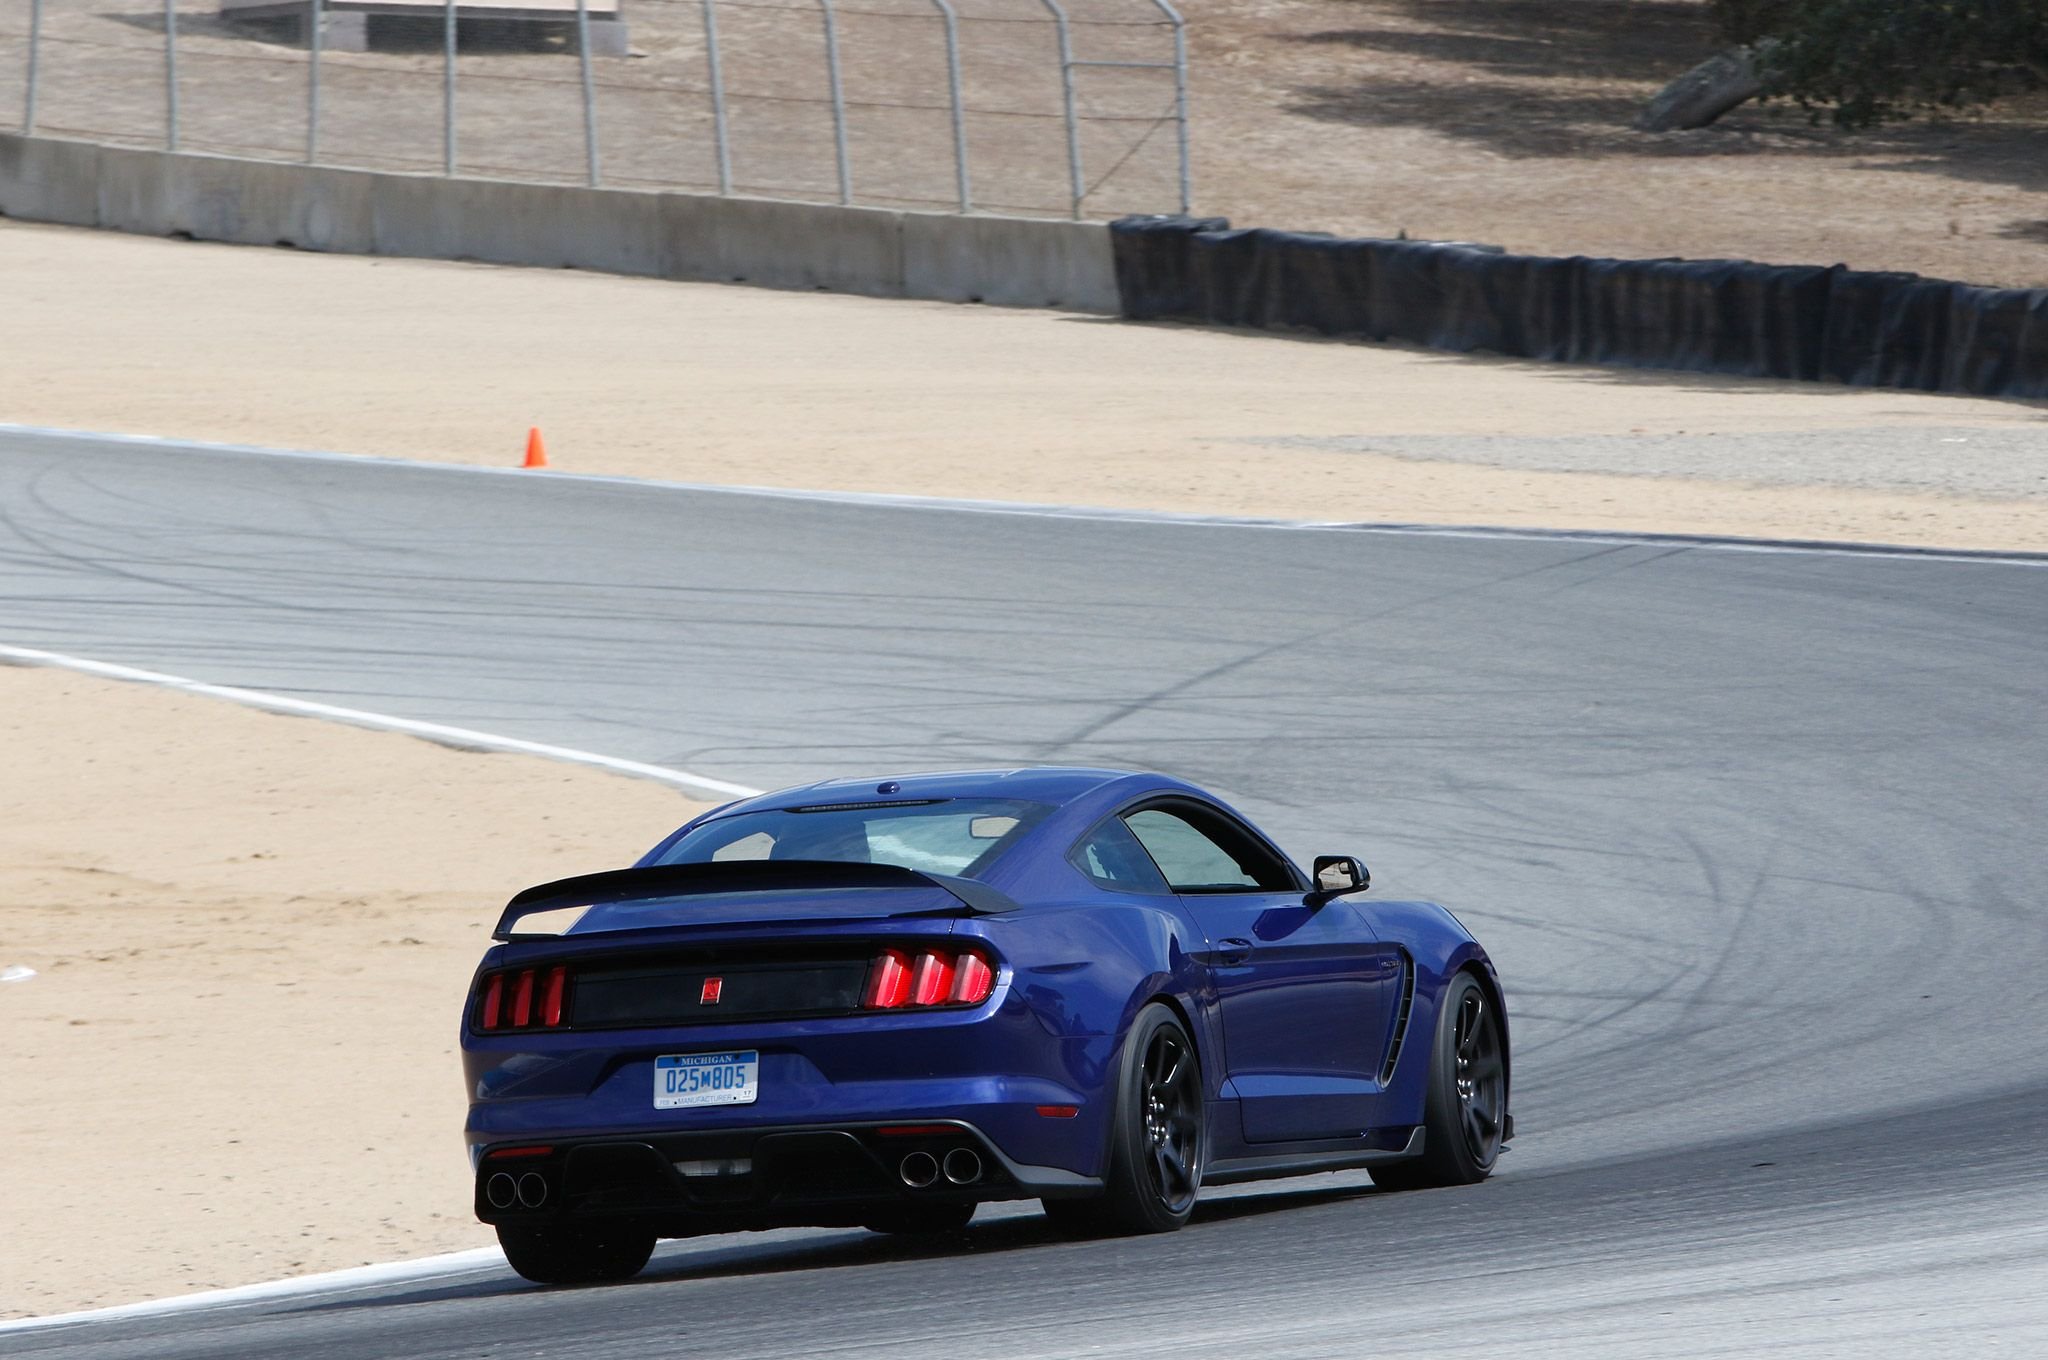 2016, Ford, Mustang, Shelby, Gt350r, Muscle, Race, Racing, G t, 350 Wallpaper